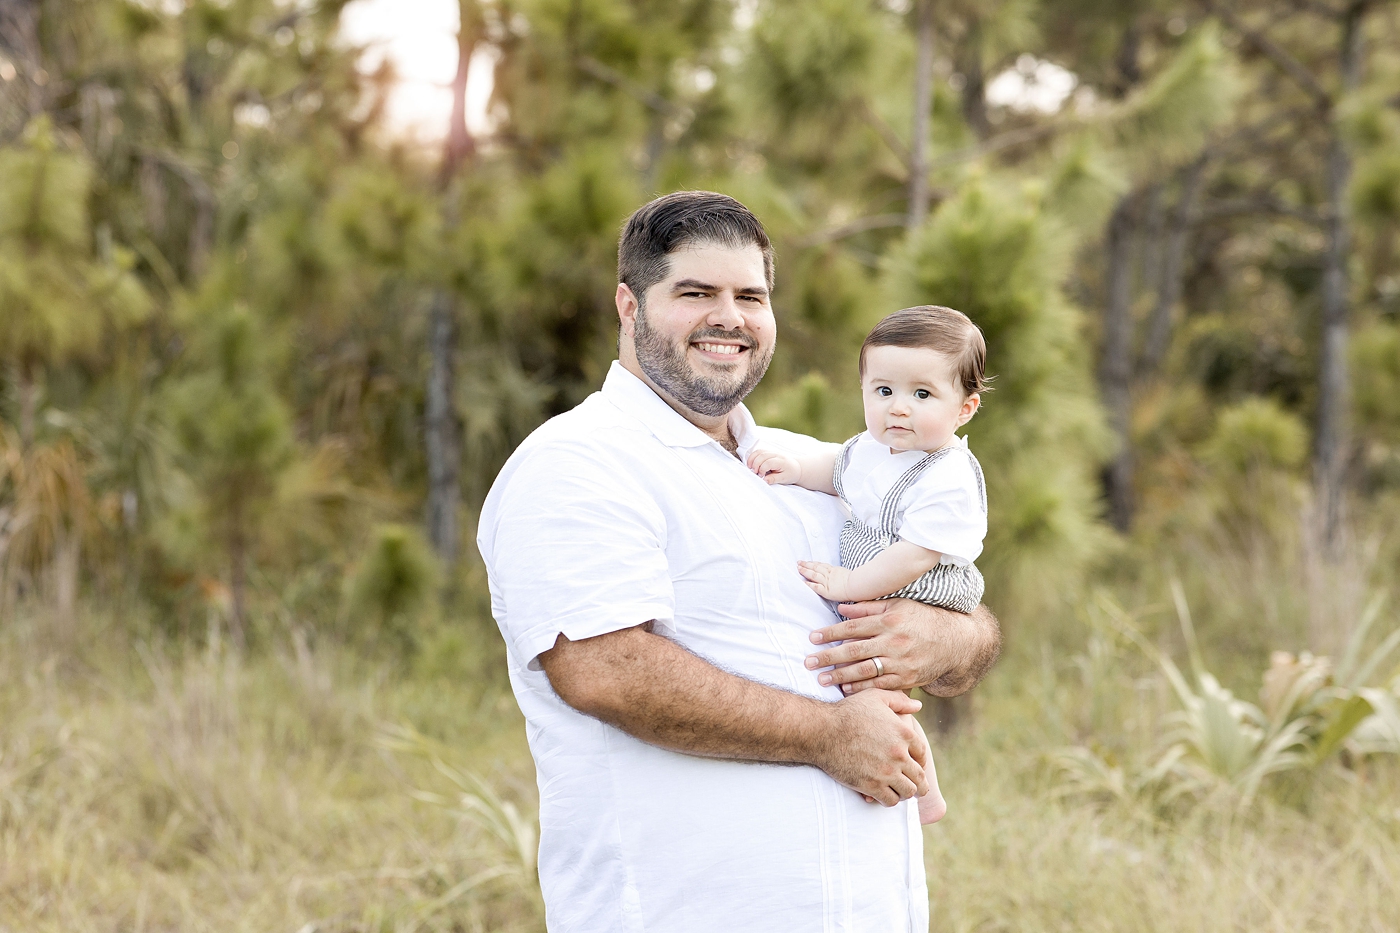 Dad holds young son proudly while smiling at Miami Children Photographer. Photo by Ivanna Vidal Photography.